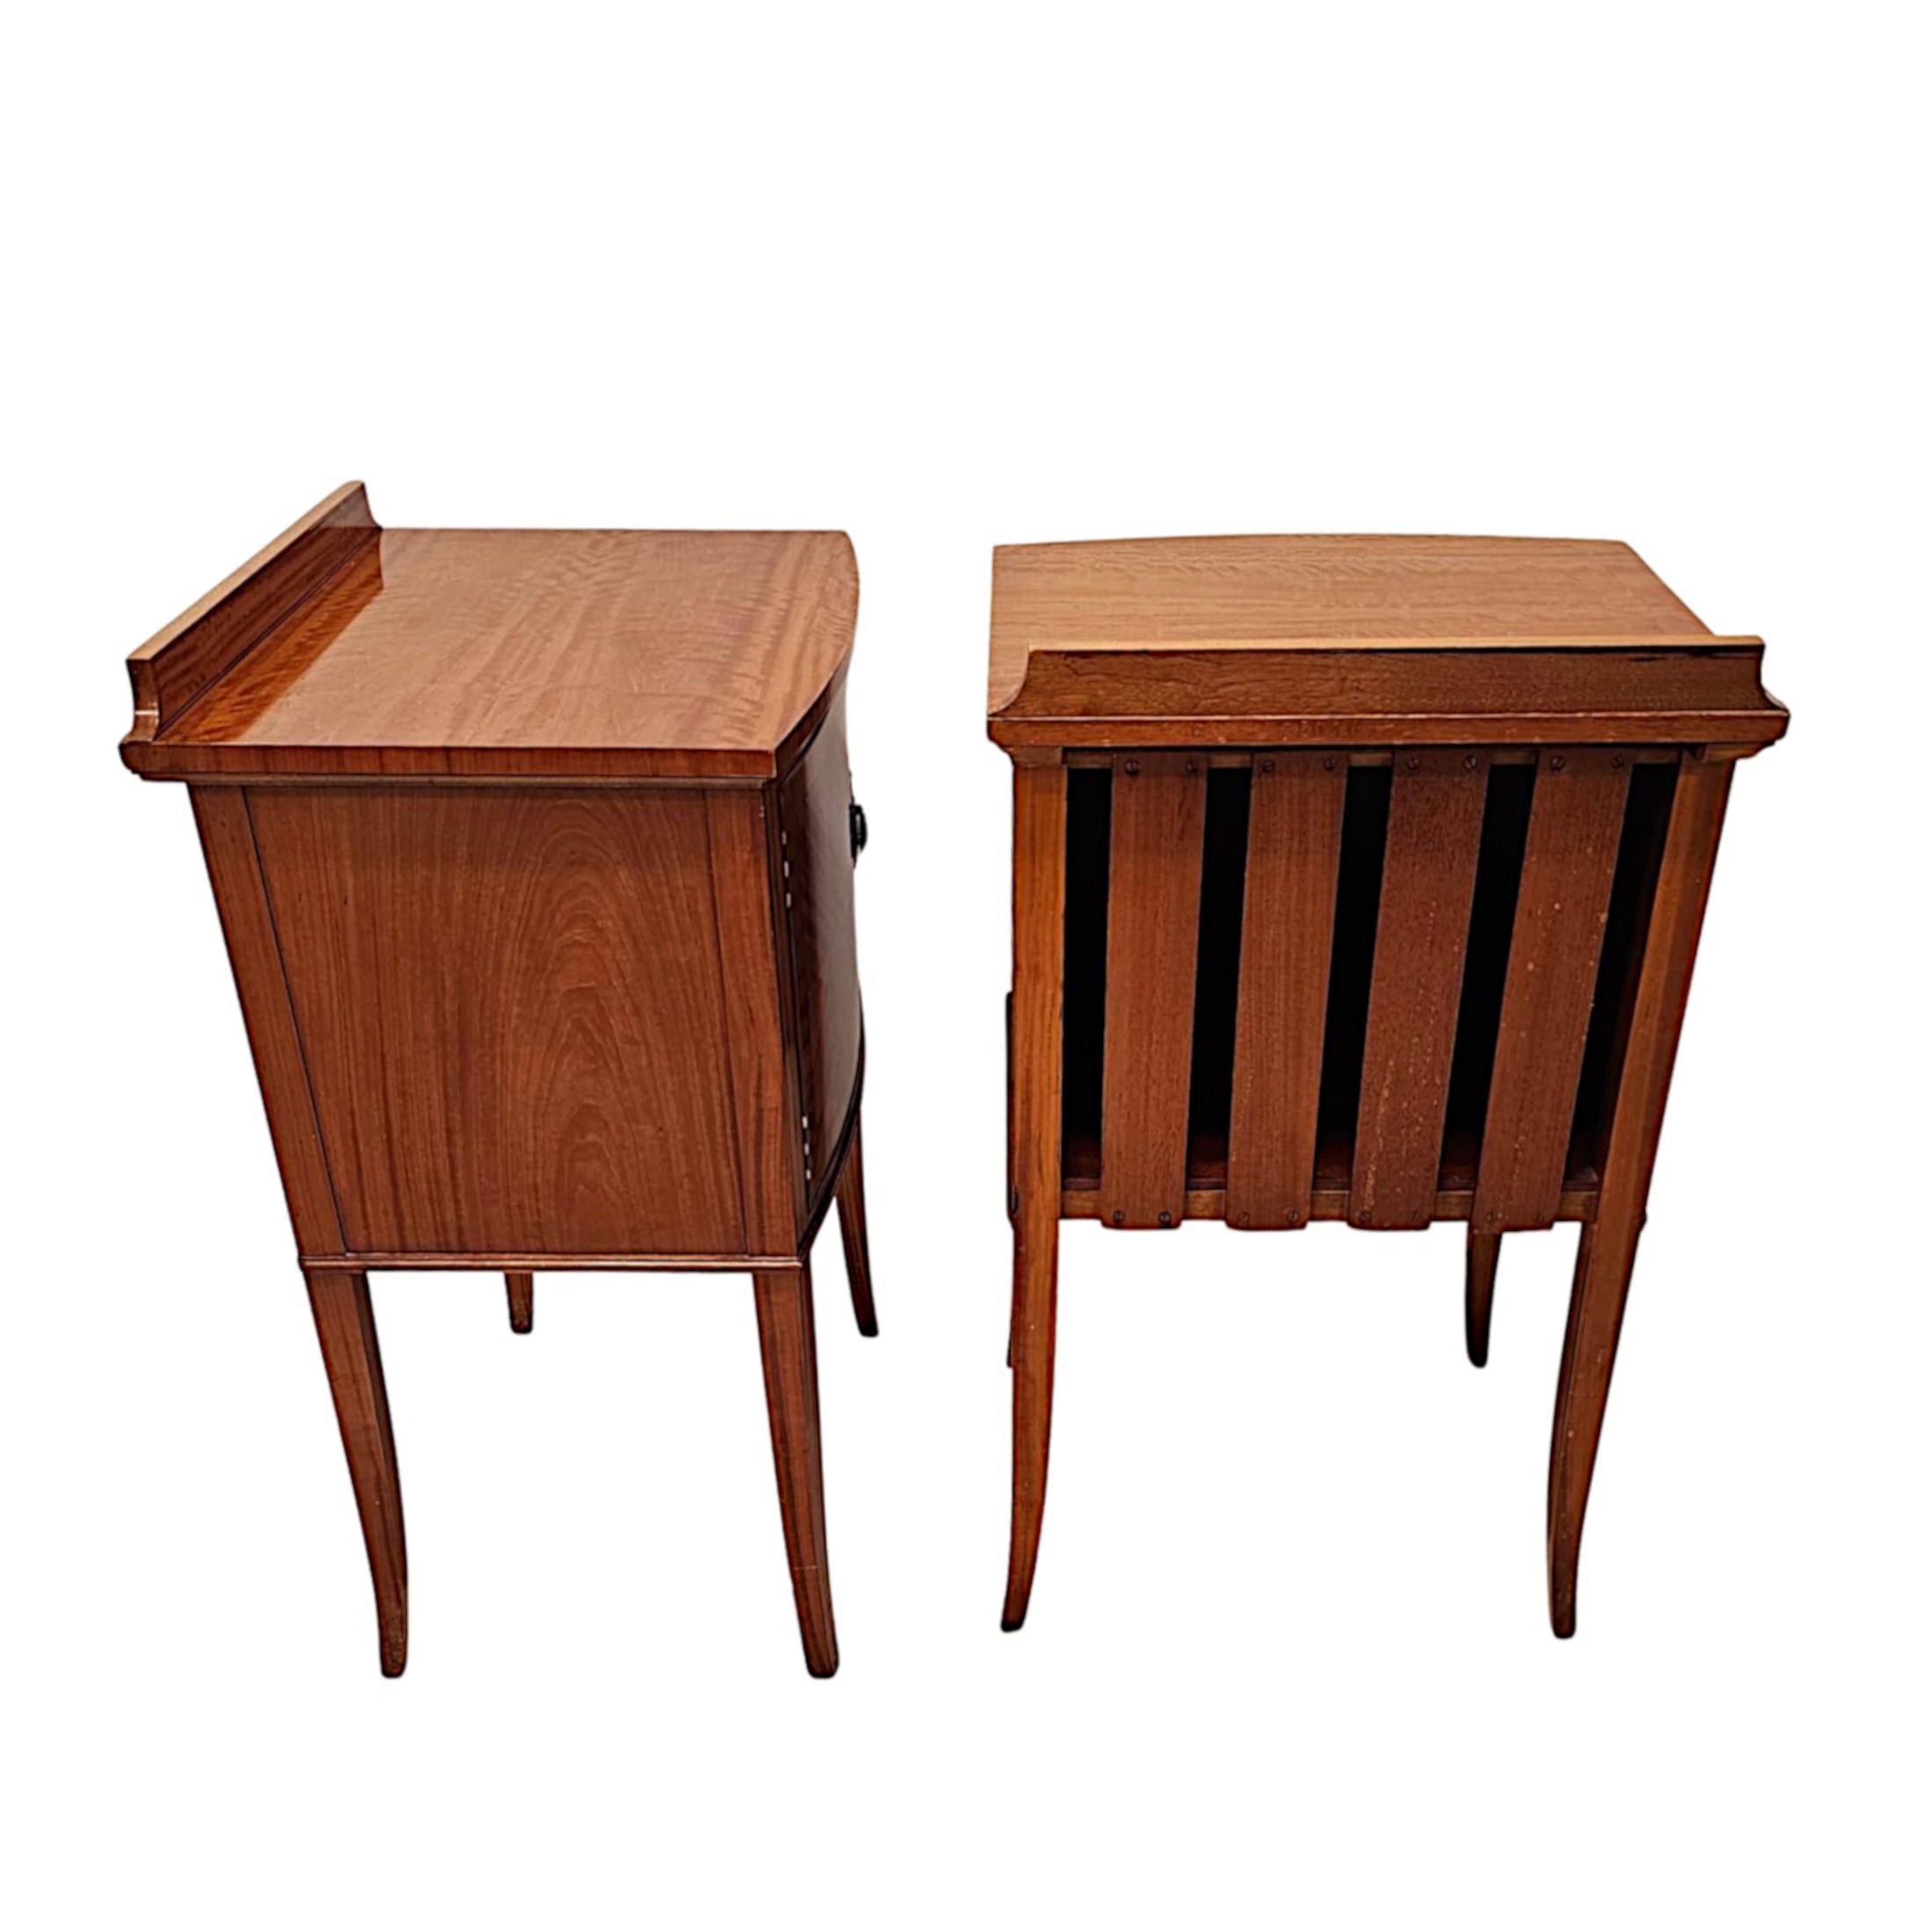 20th Century A Fabulous Edwardian Pair of Inlaid Satinwood Bedside Cabinets